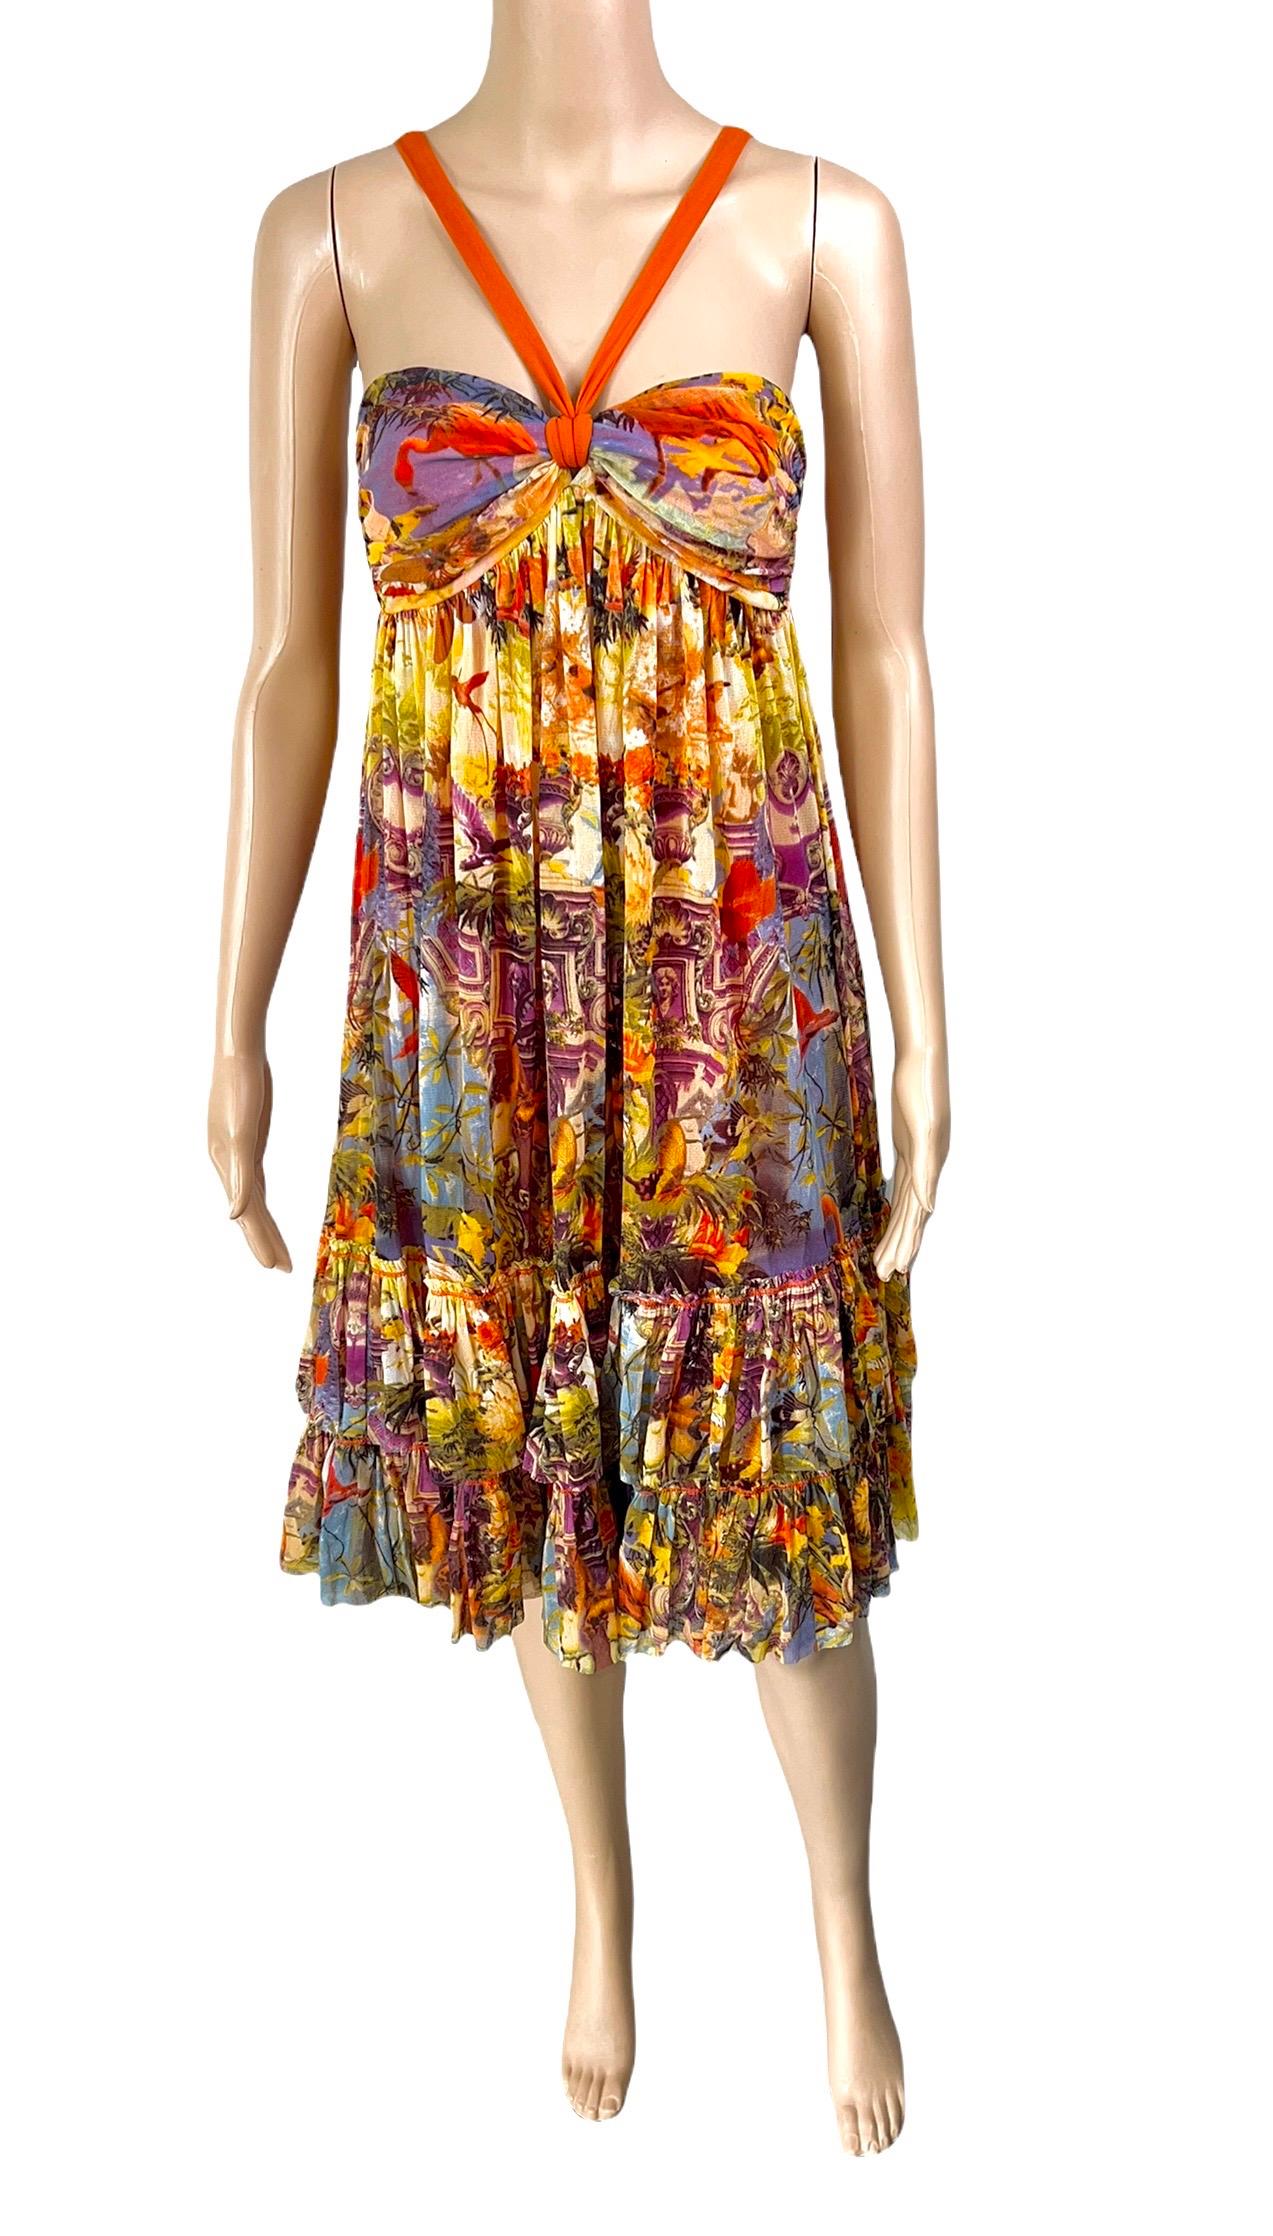 Jean Paul Gaultier Soleil Tropical Flamingo Print Halter Ruffled Dress In Good Condition For Sale In Naples, FL